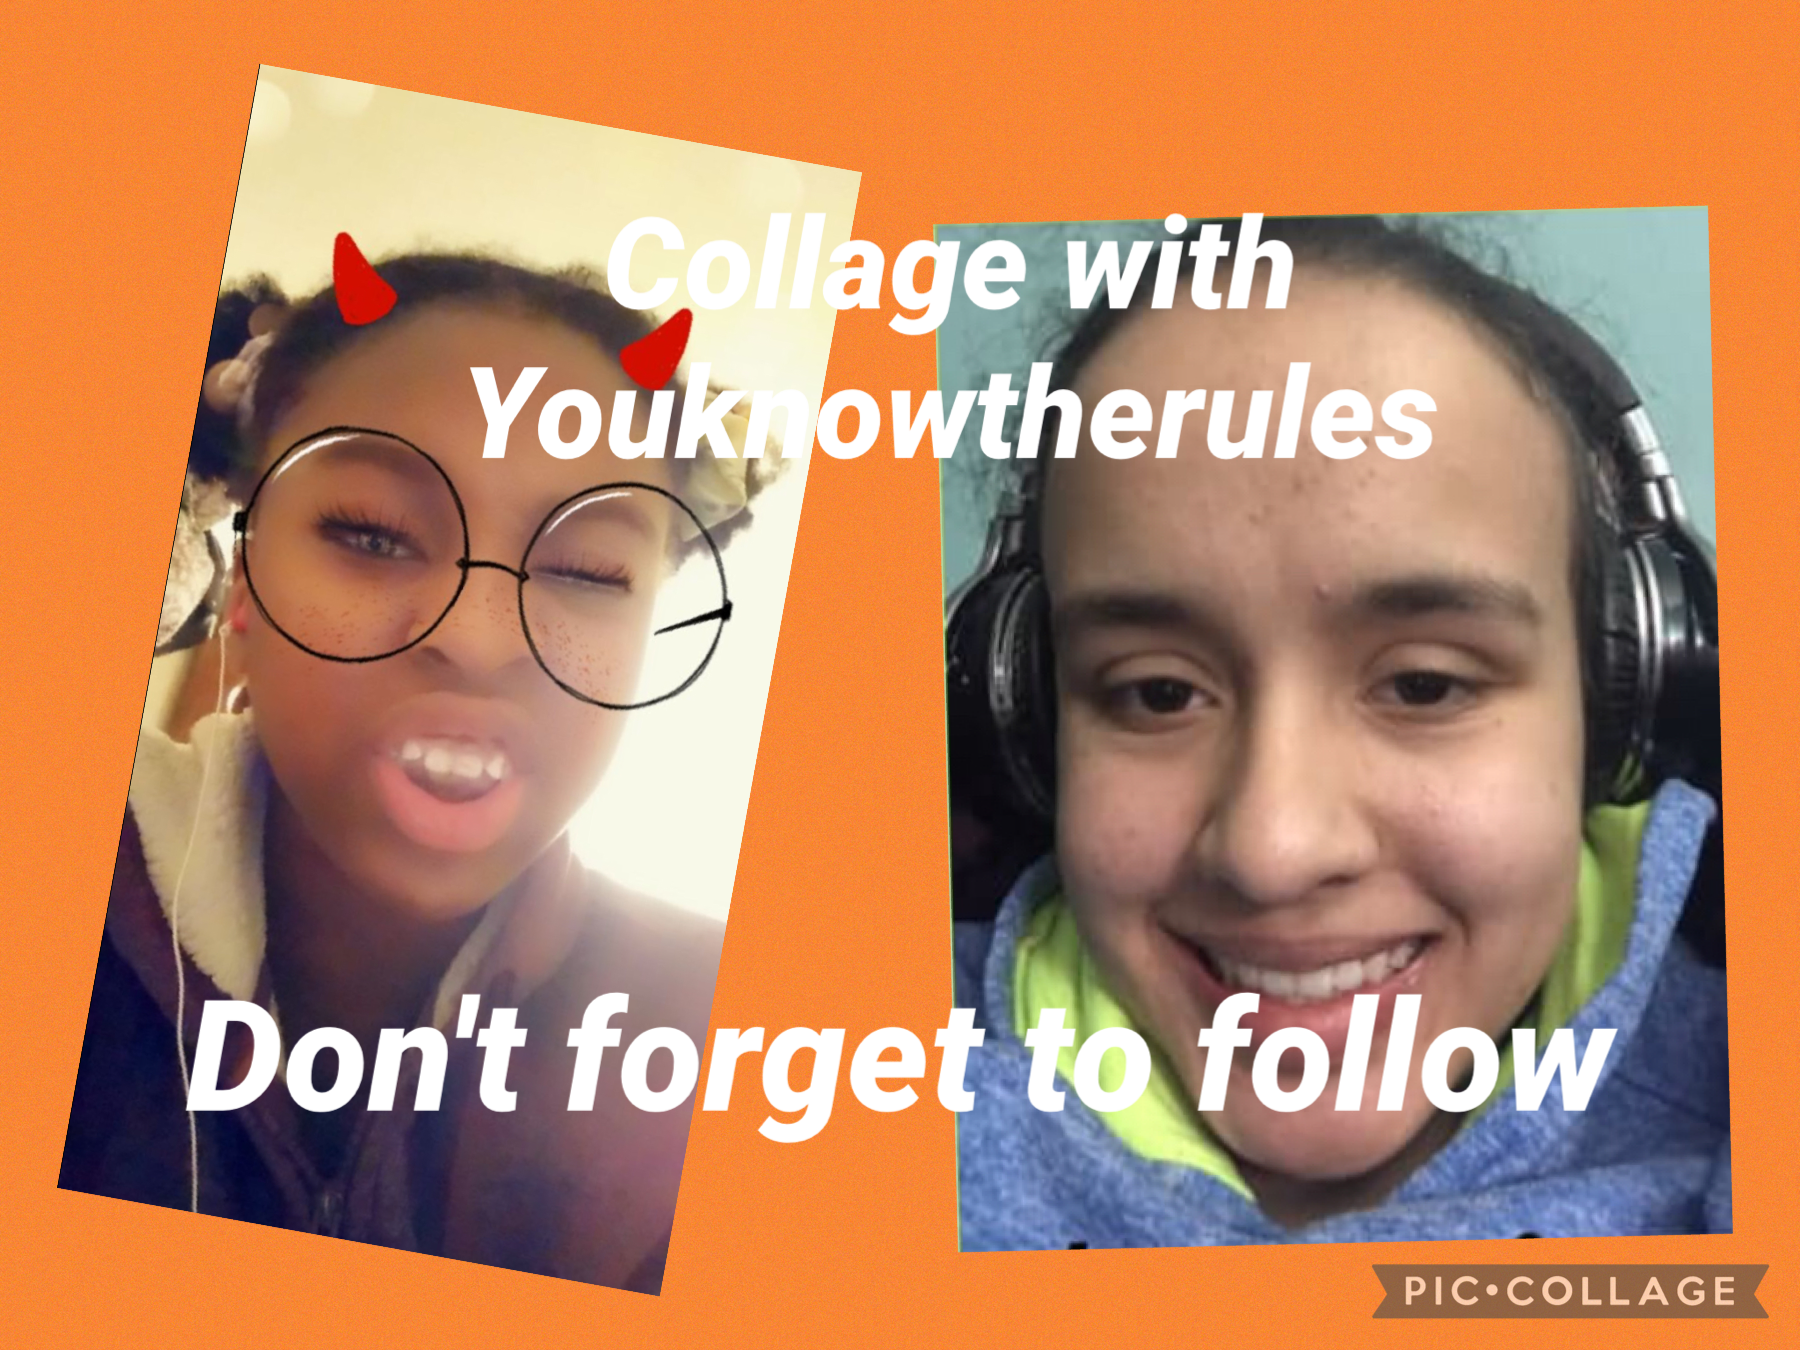 @Youknowtherules Dont forget to chack them out and follow.